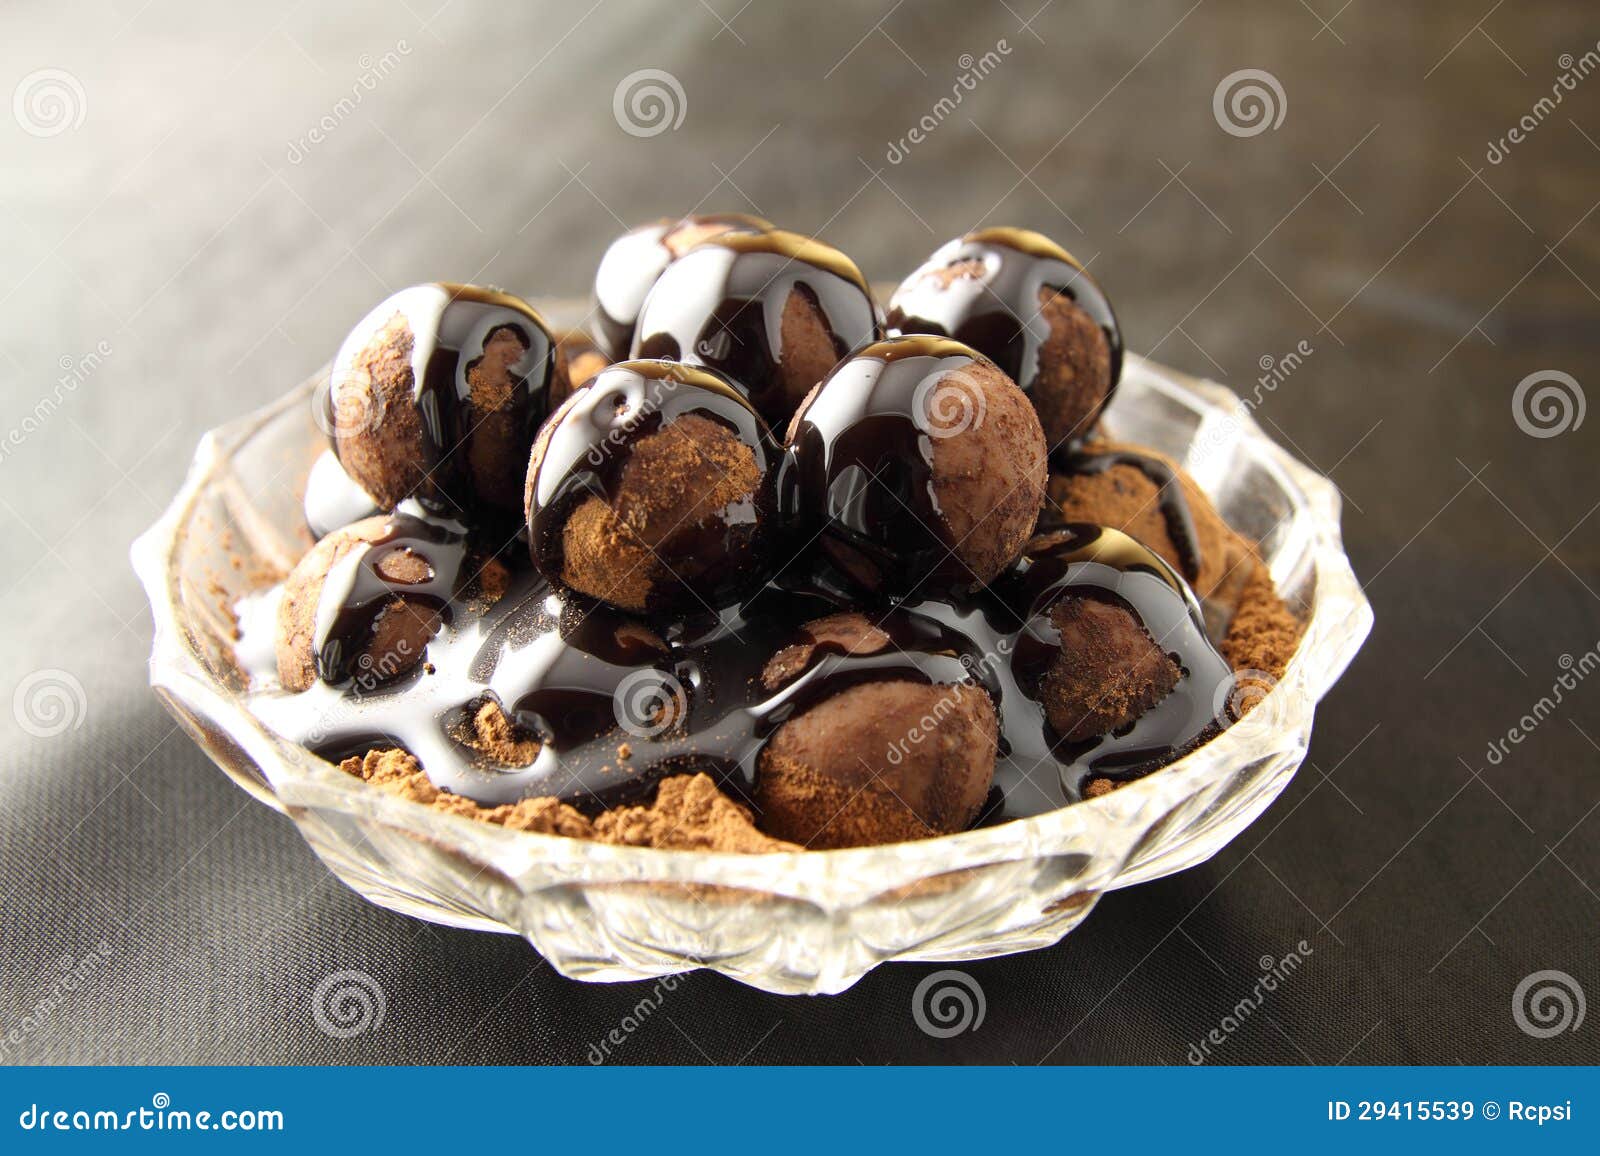 bowl with chocolate balls